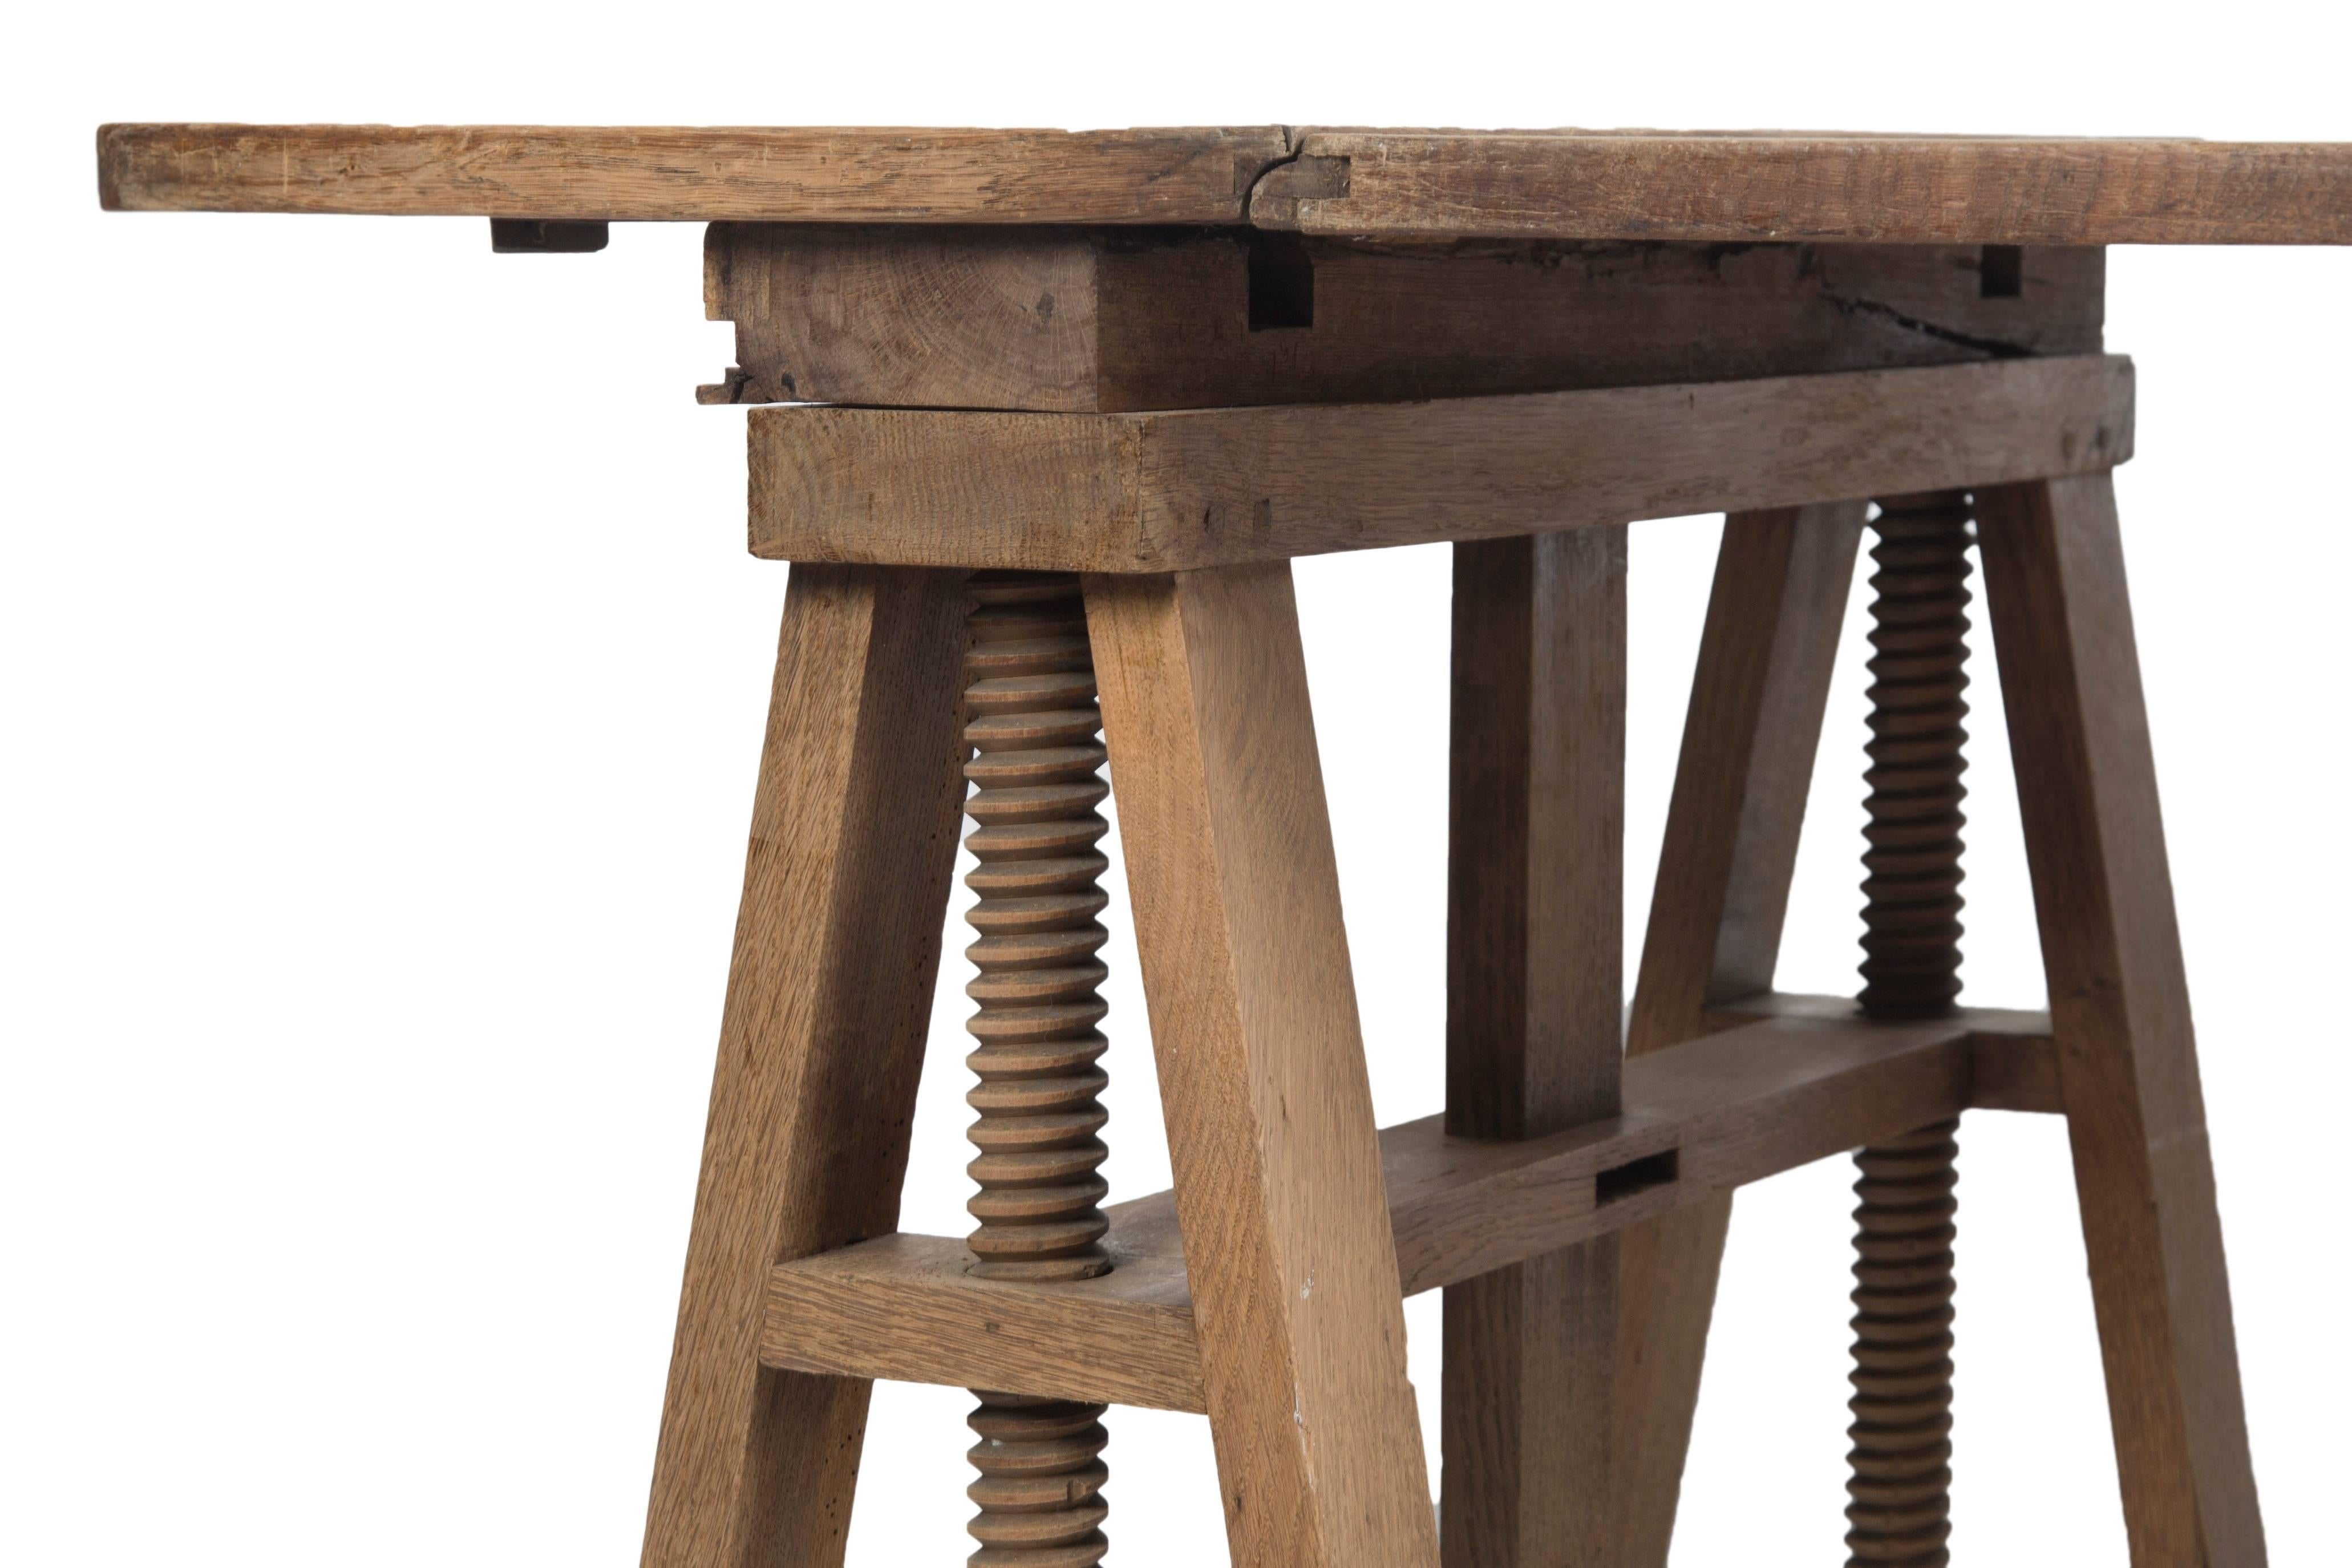 Early 20th century Vernacular adjustable artist’s trestle table. The unfinished oak having a good oxidized natural patina. These types of tables would hold art and sculpture for display in a studio environment.